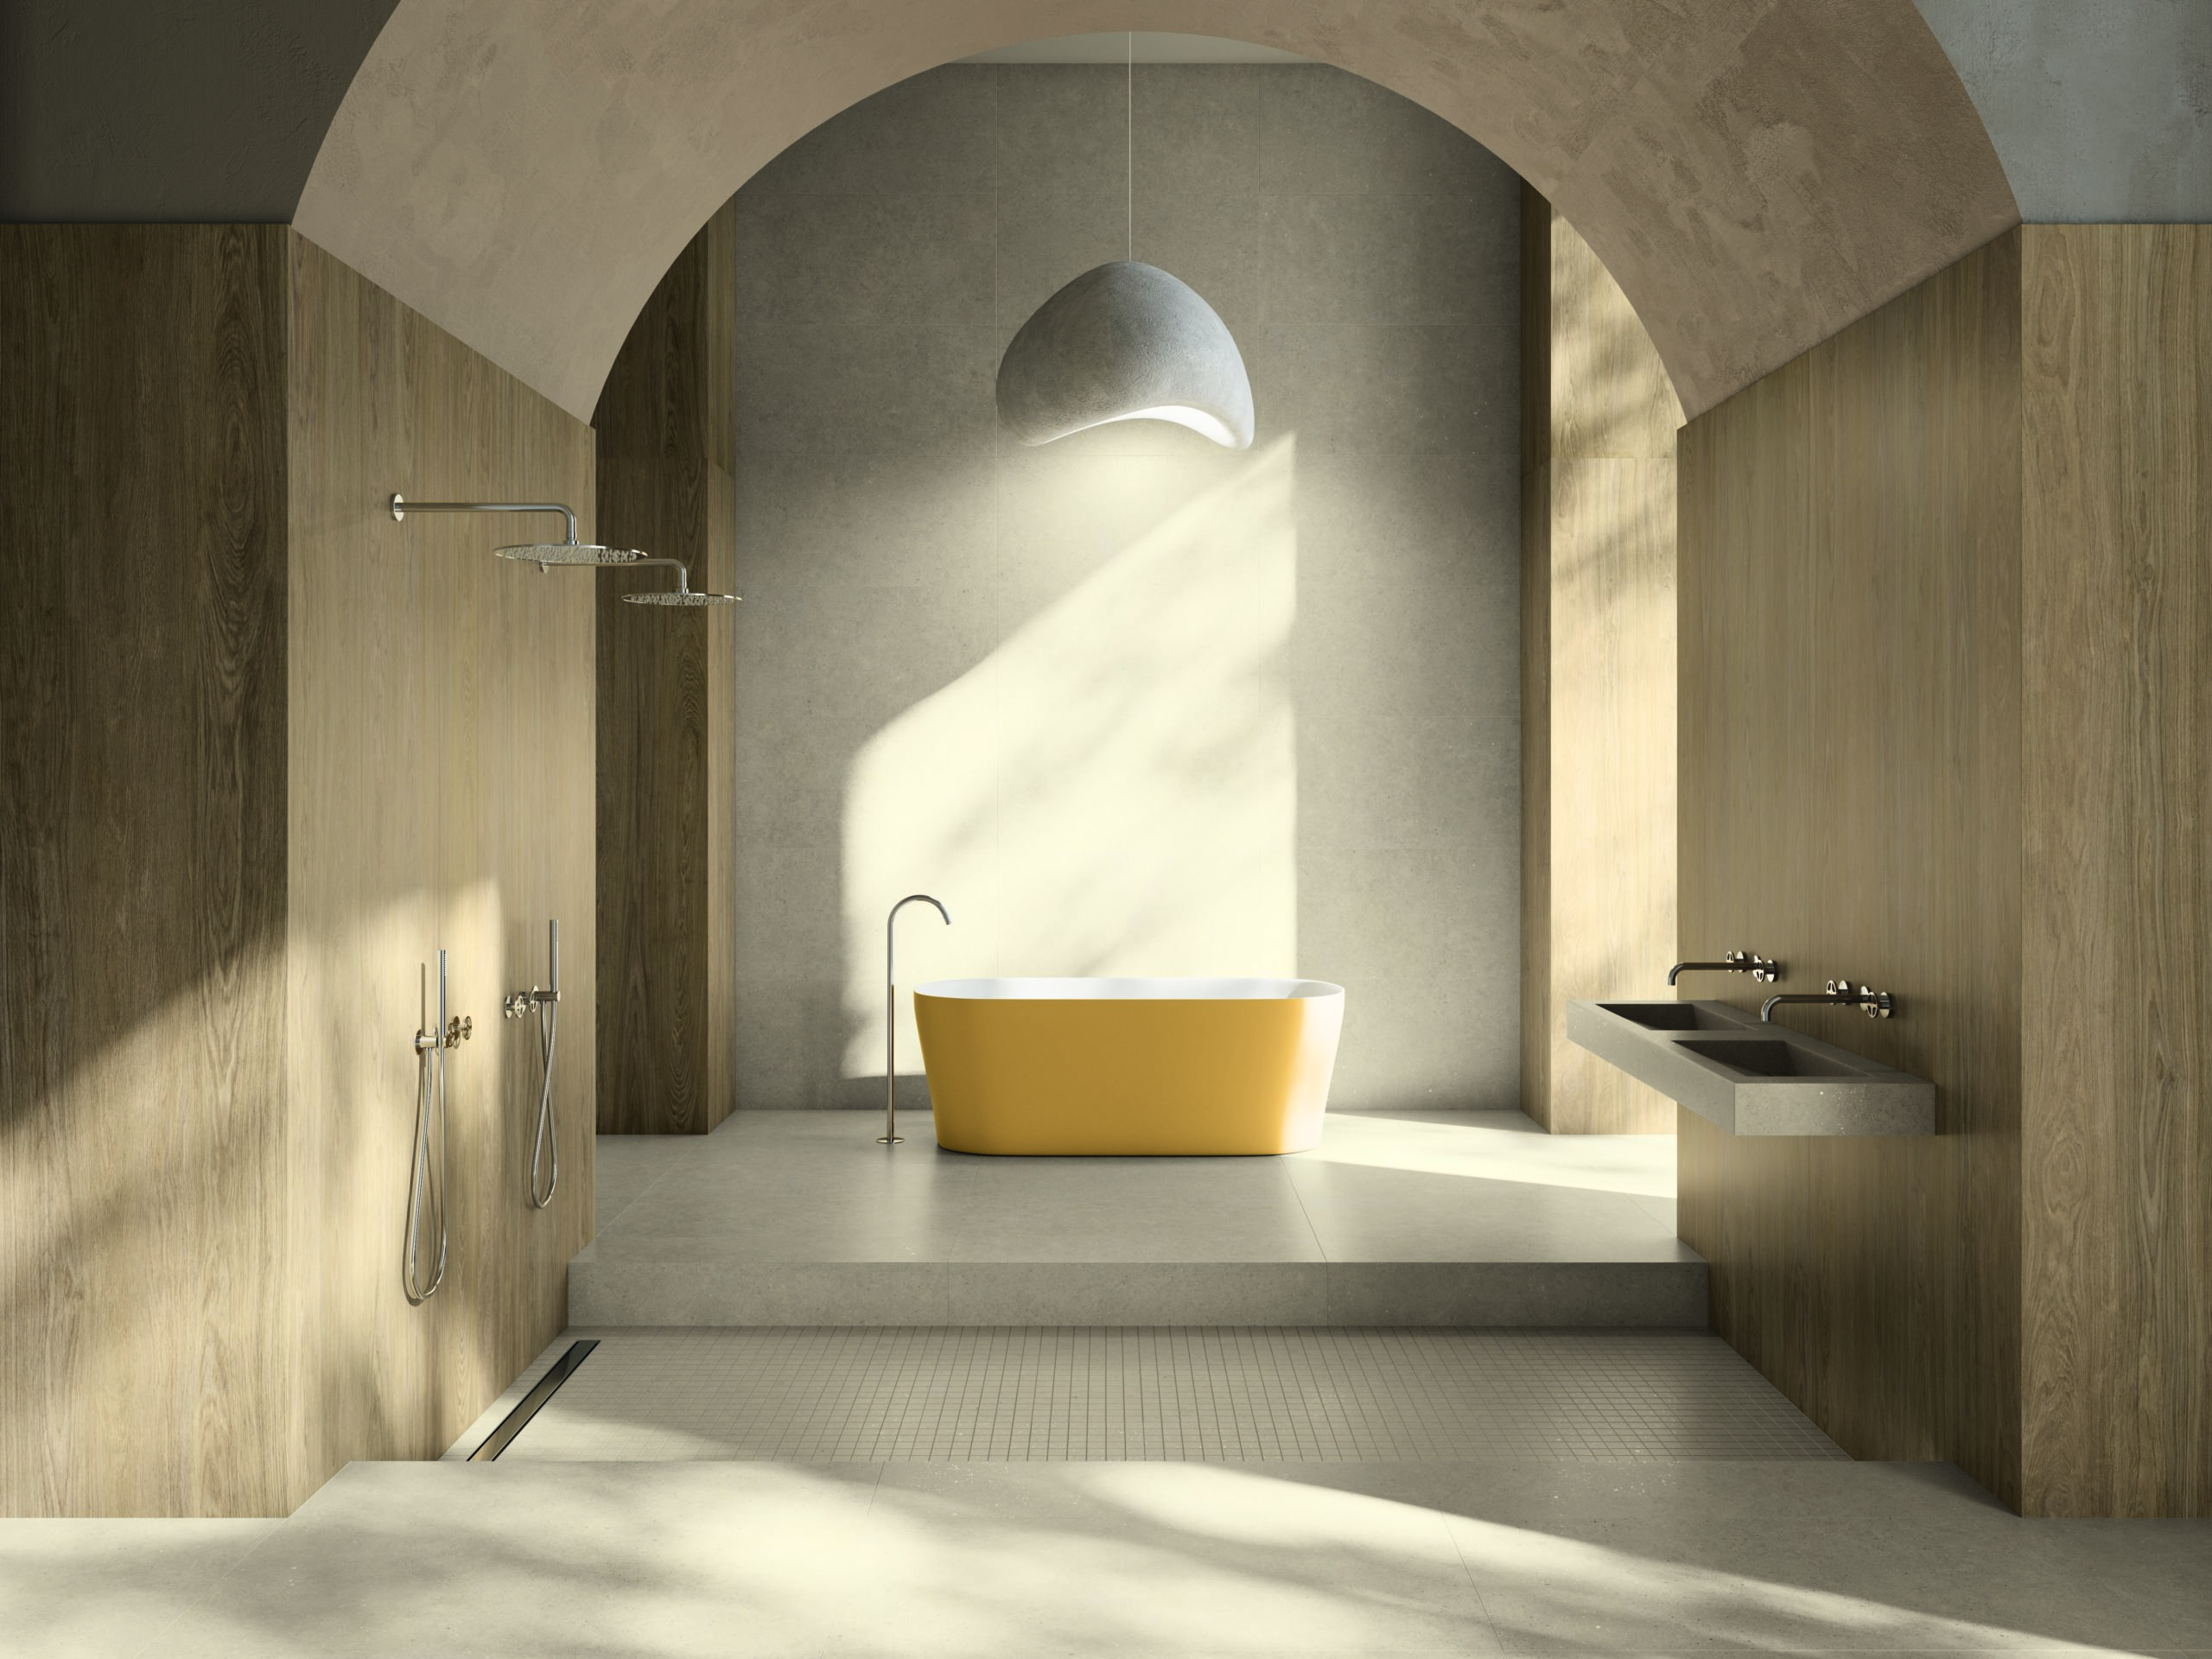 KINKFOLK collection by XLINING with Ilbagno sink, presented at Cersaie